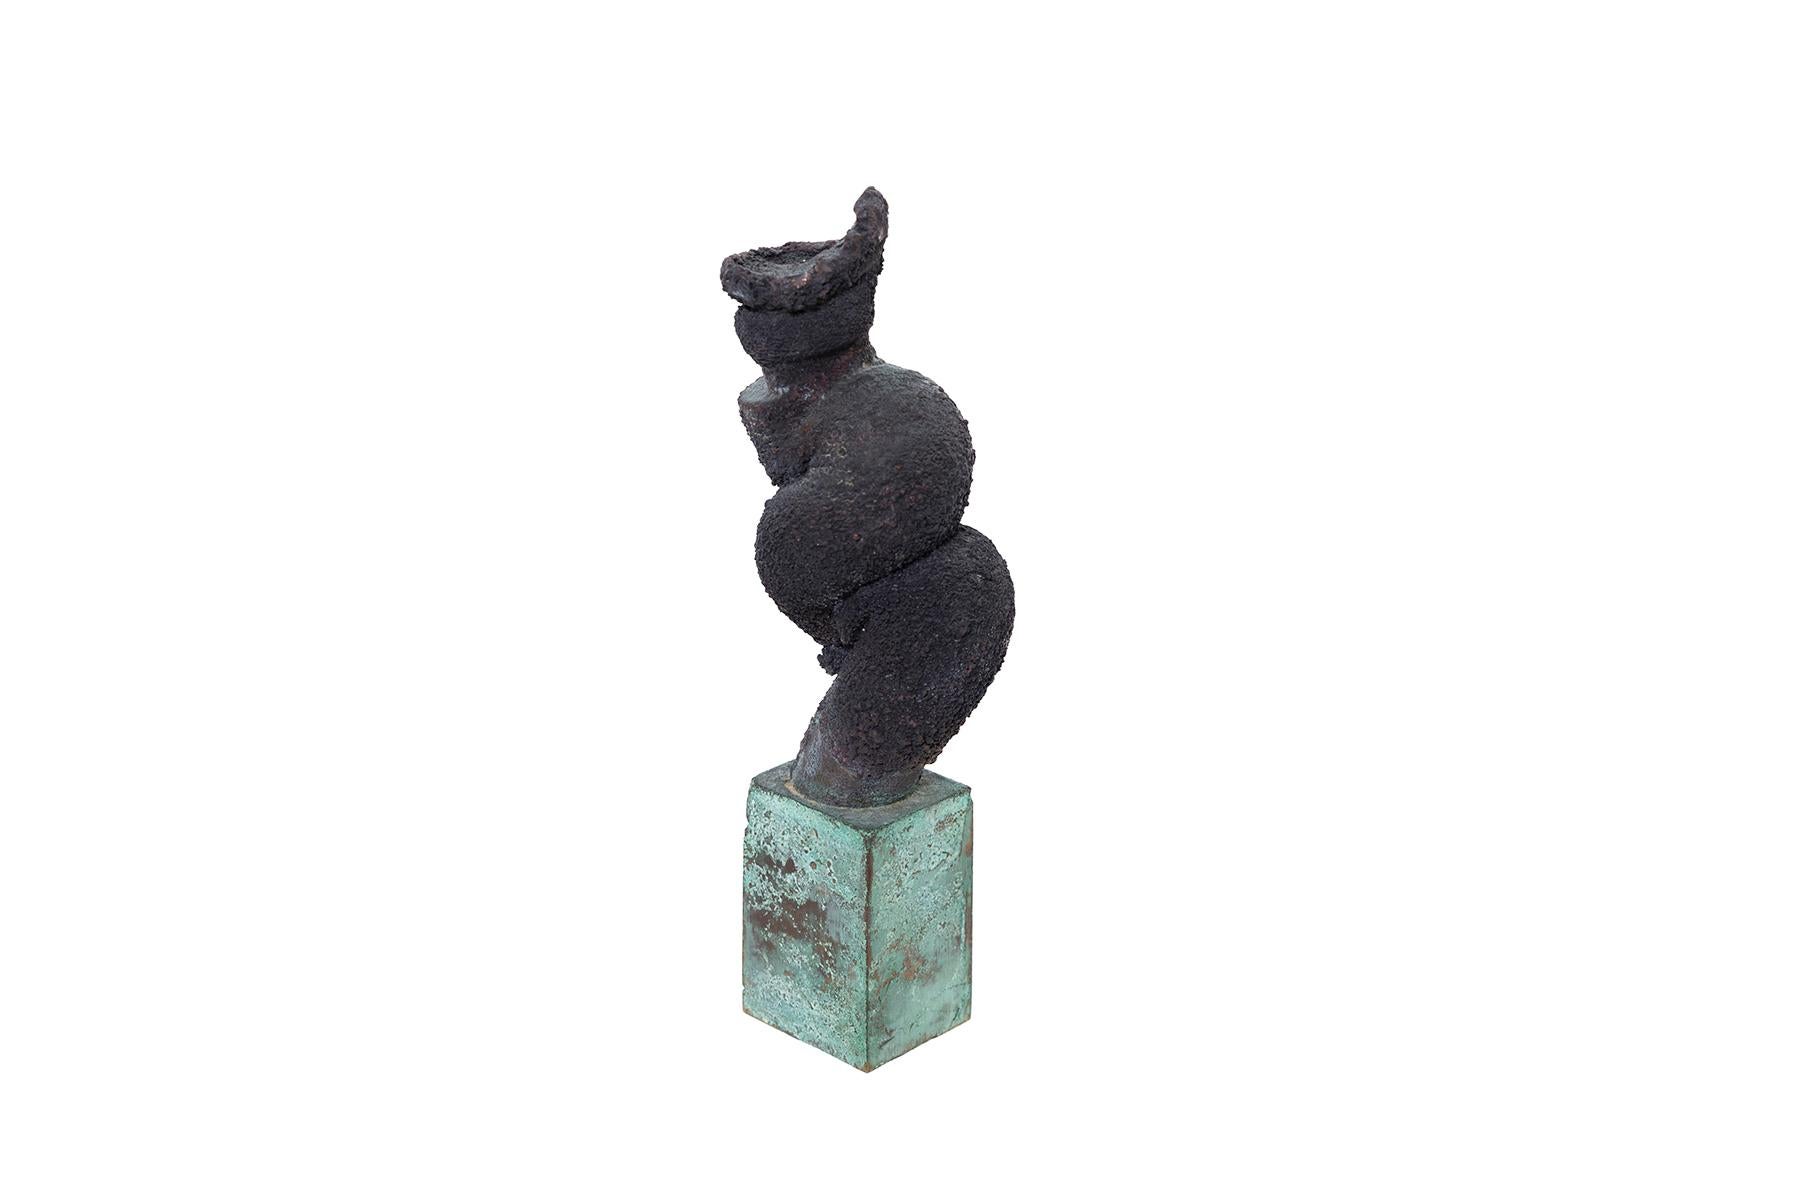 Whimsical sculpture with green-patina base and blackened twist form by Harry Bertoia. Please inquire about Red Modern's other small sculptures available by Bertoia.